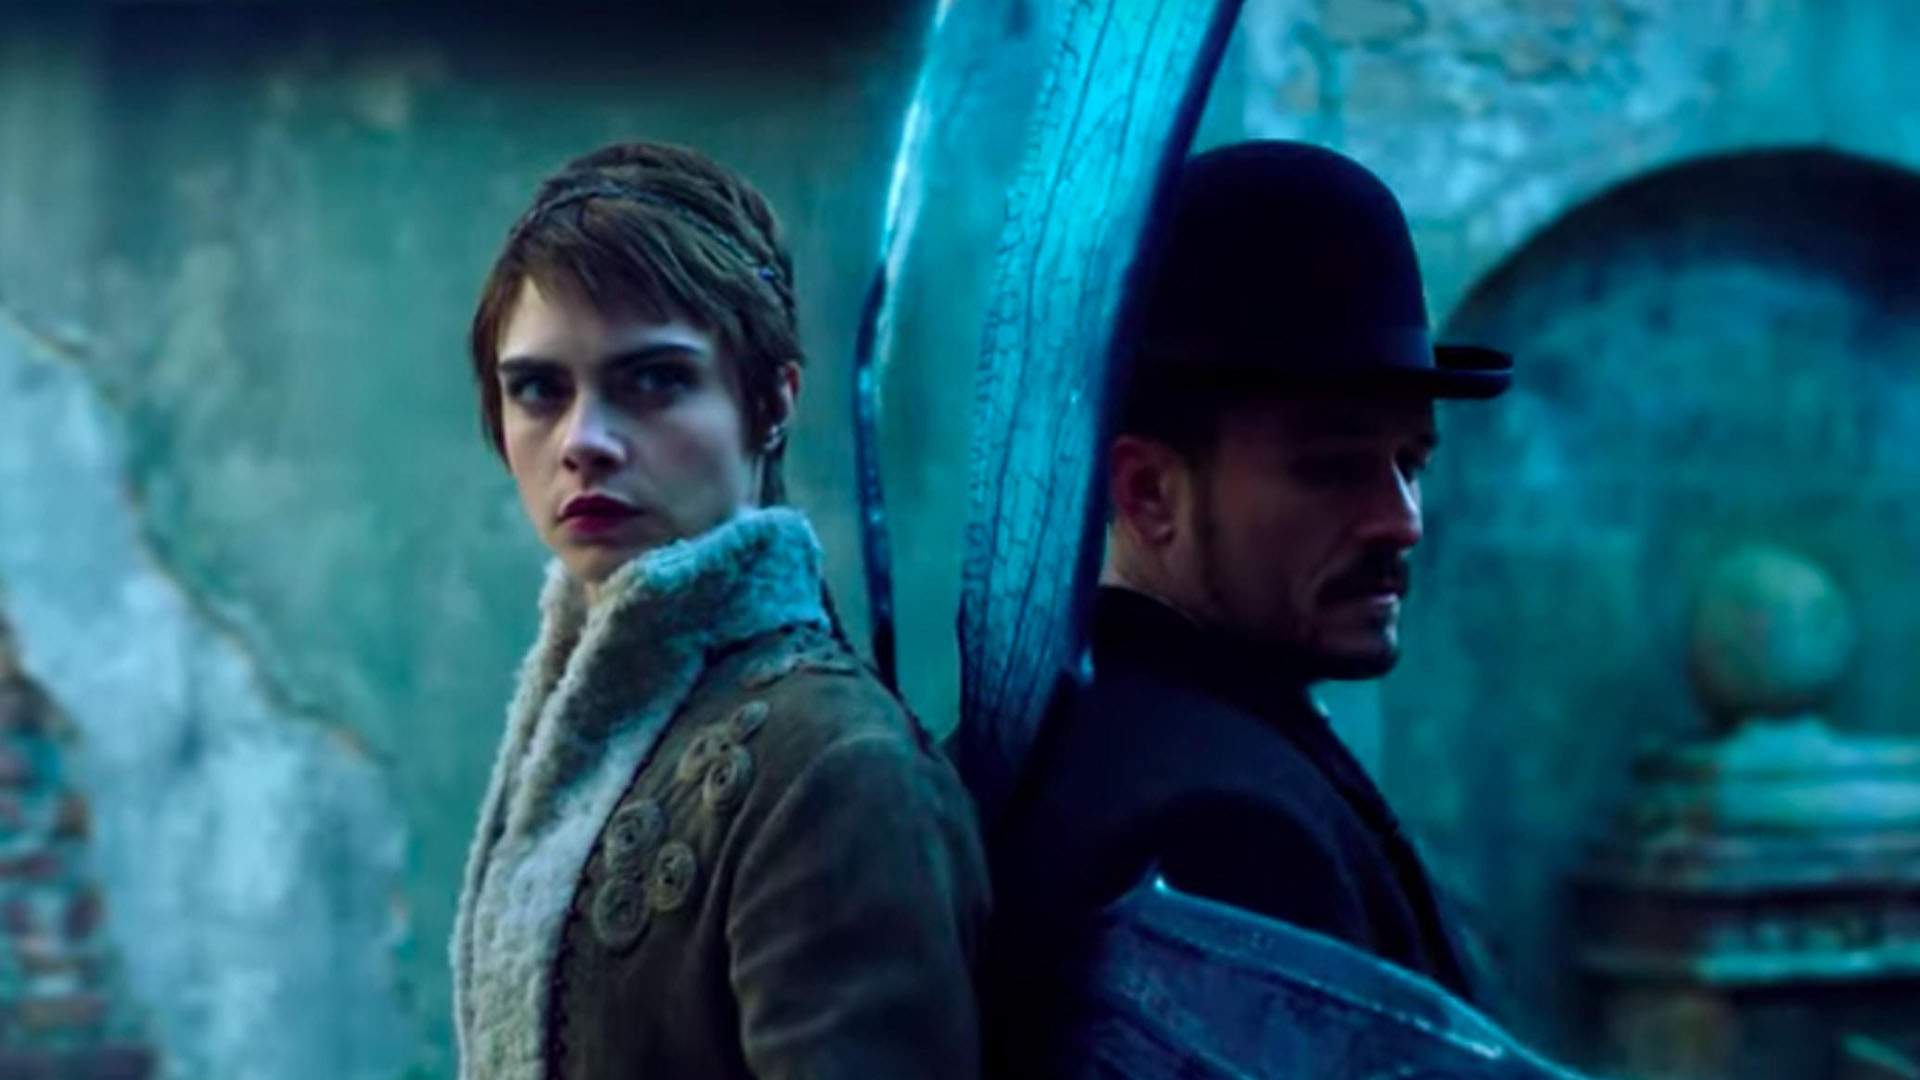 Amazon Prime Has Dropped the Trailer for Its Star-Studded New Fantasy Series, 'Carnival Row'